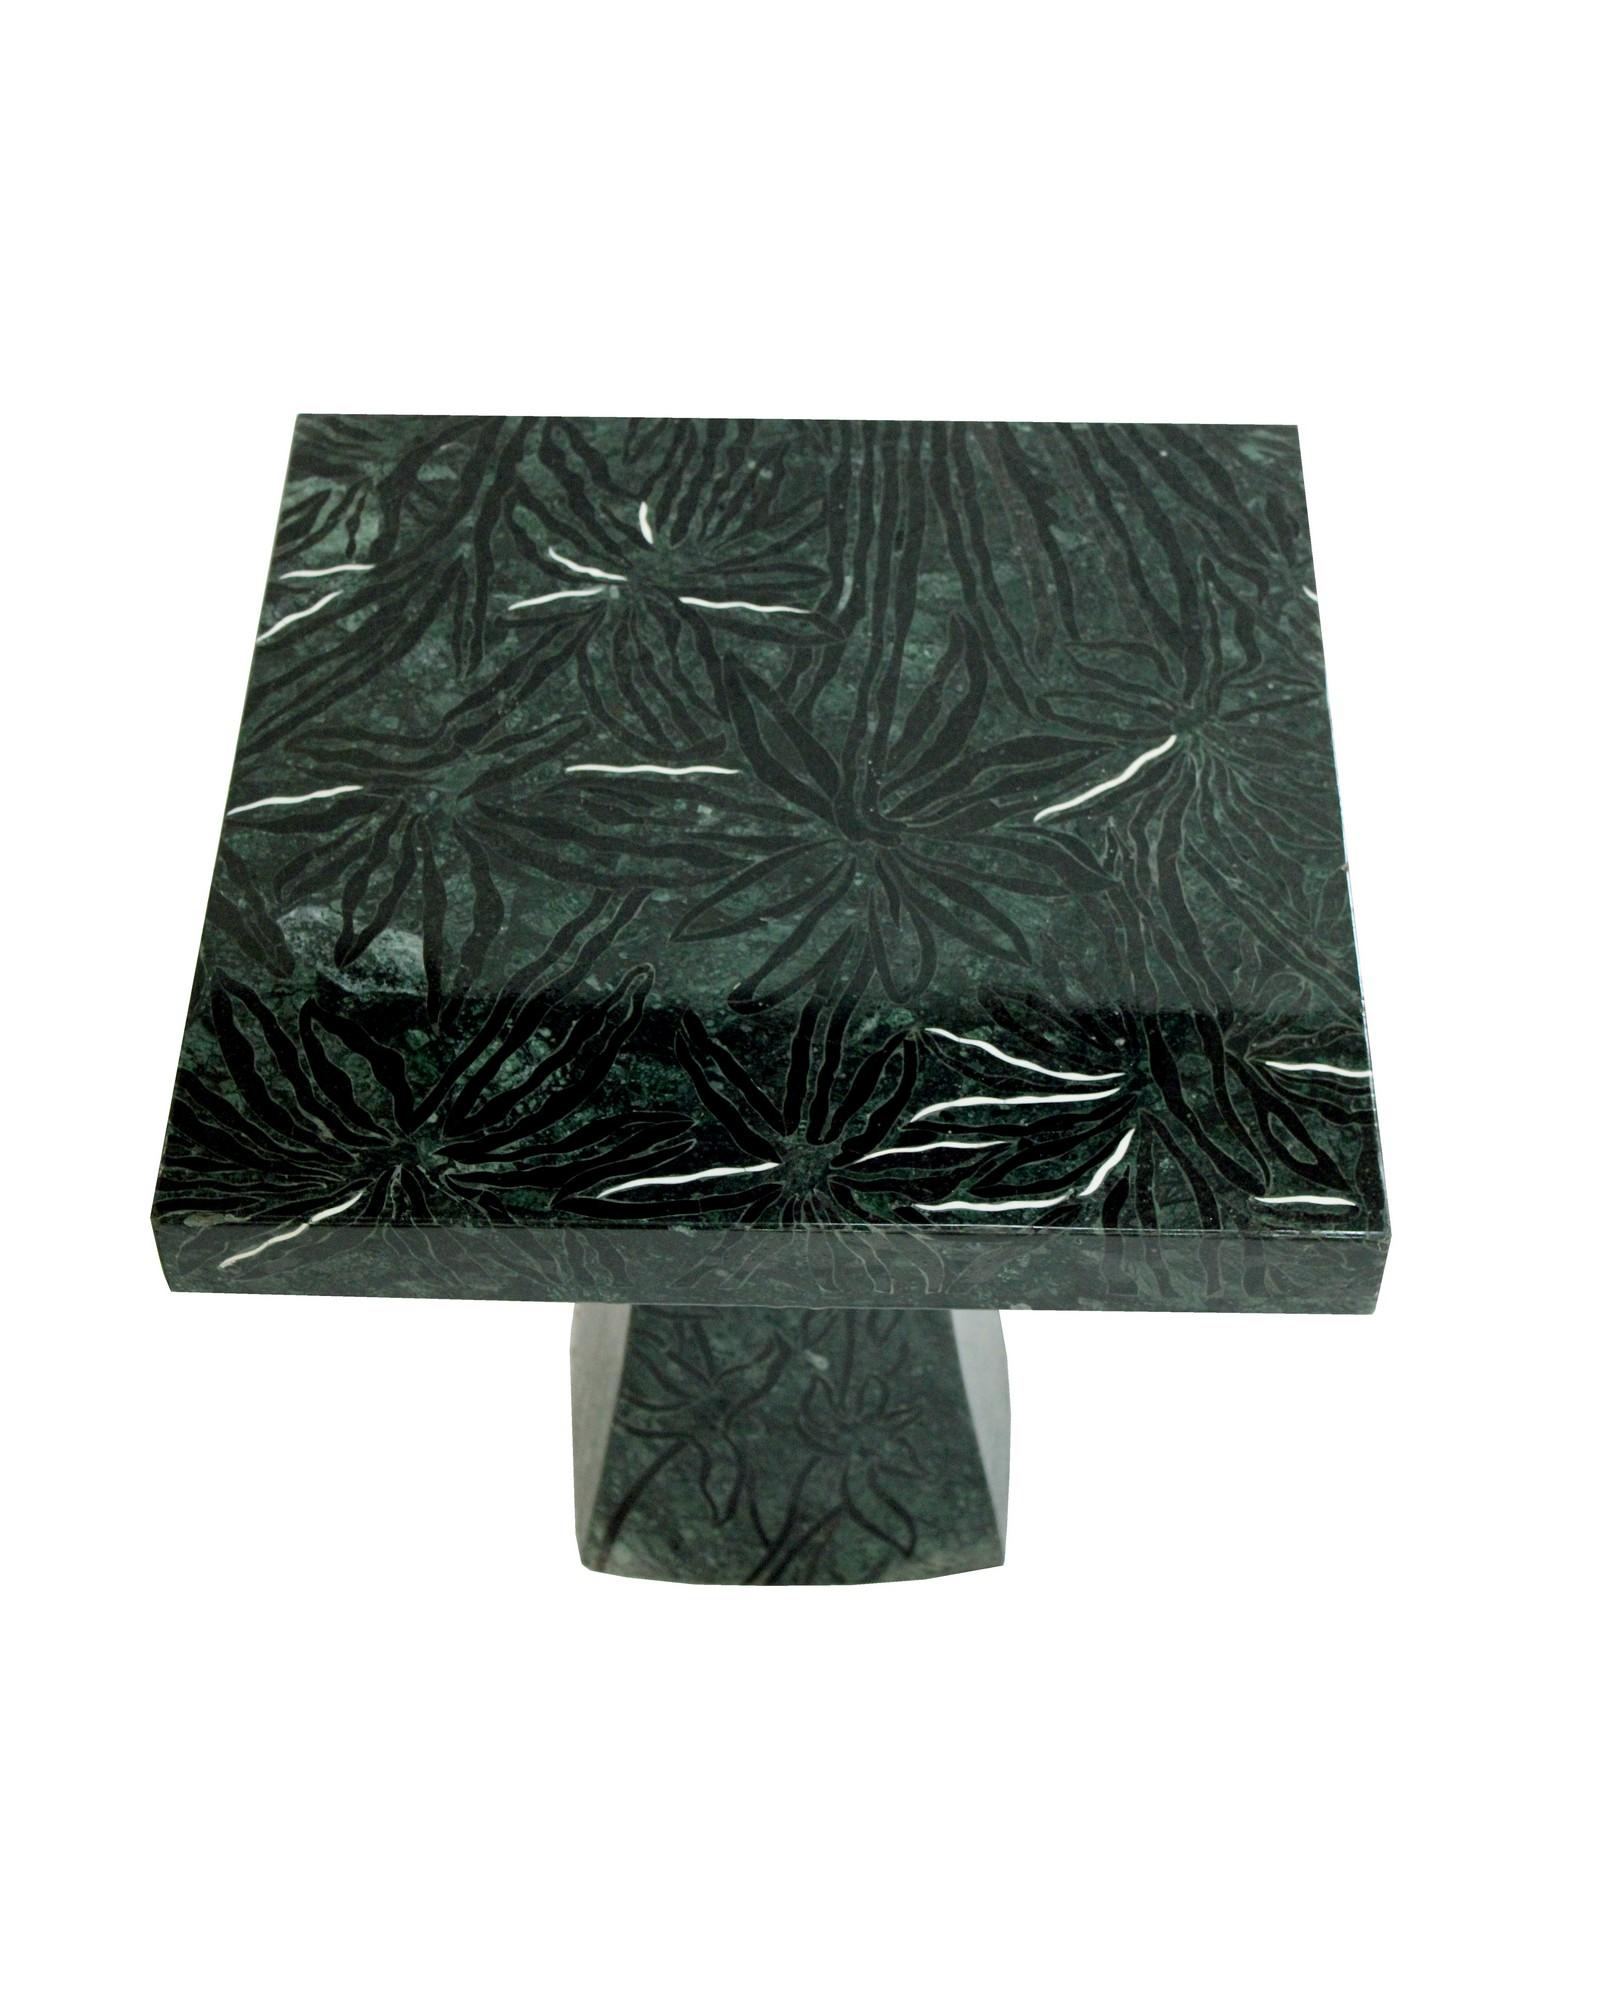 Hand-Carved Set of Two Palms Tables in Green Marble Handcrafted in India For Sale